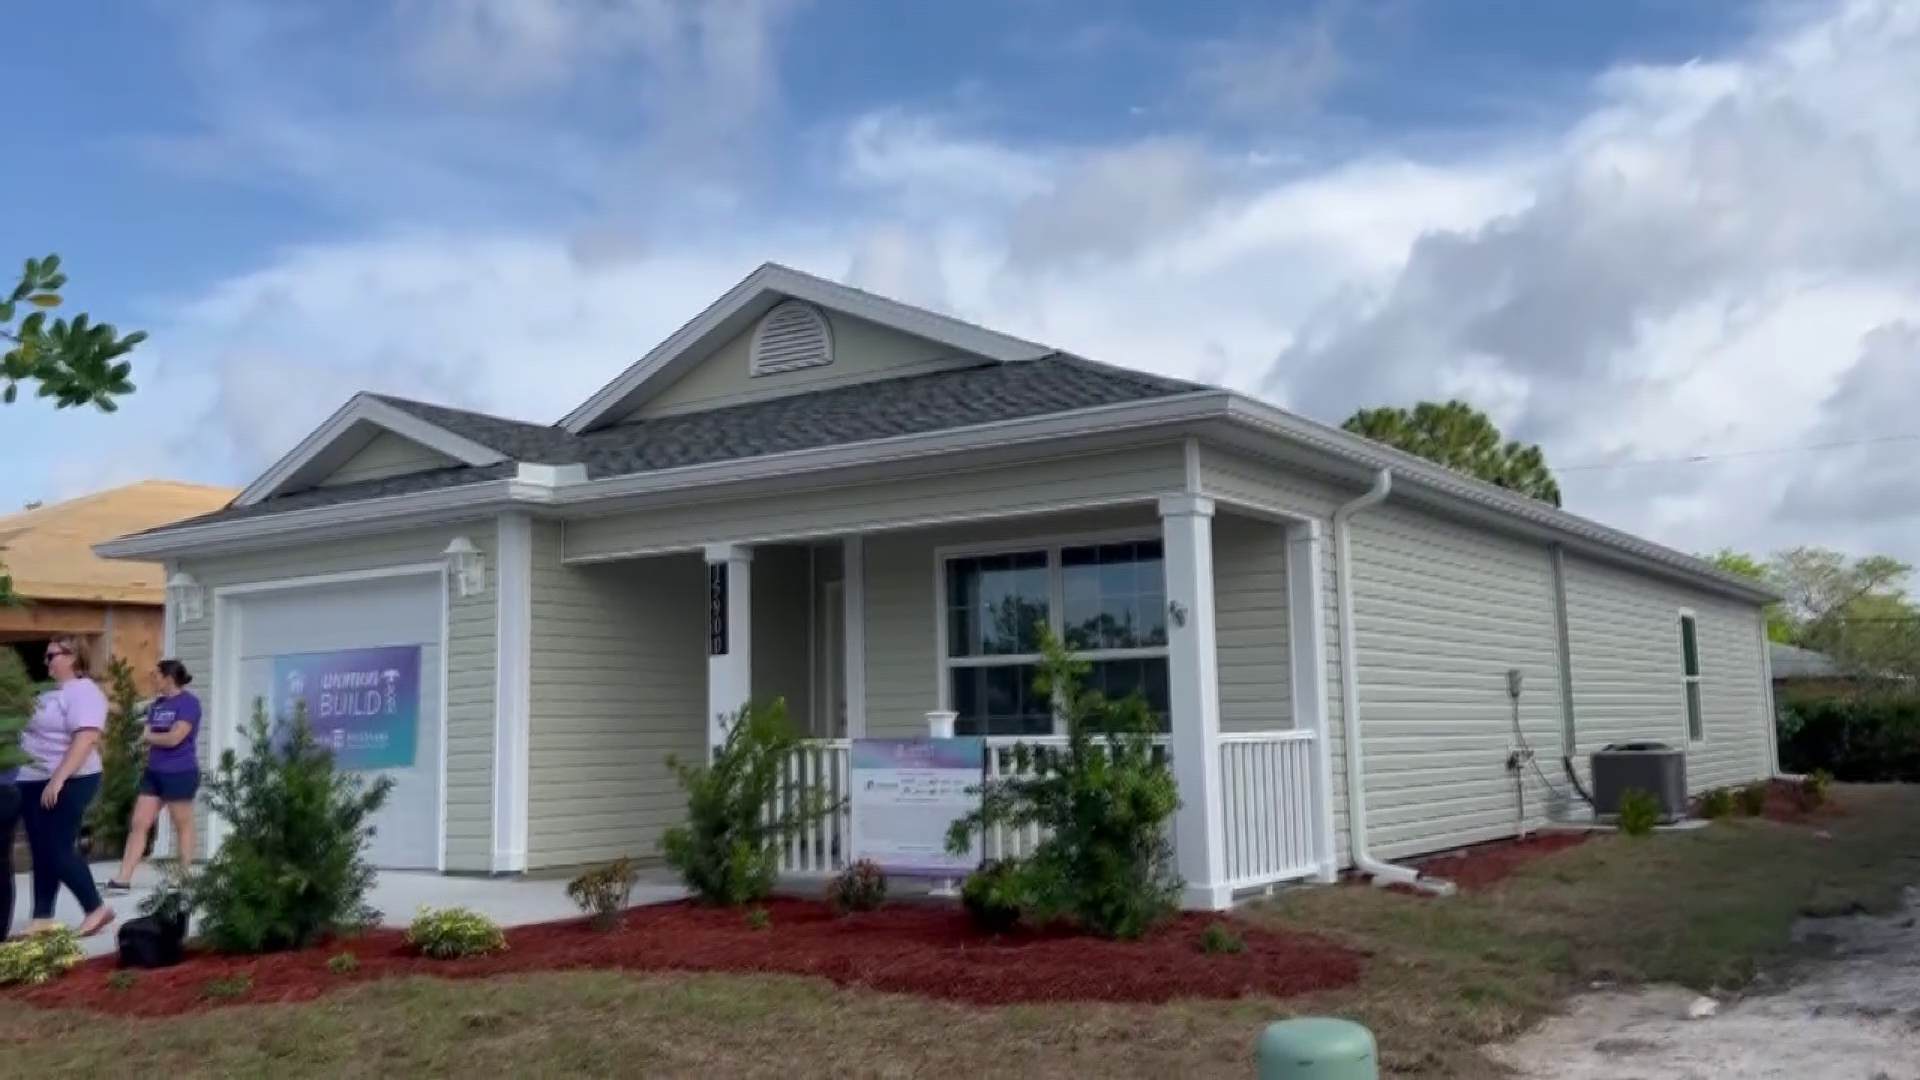 Mother's Day made special by Habitat for Humanity home for single mother - Wink News